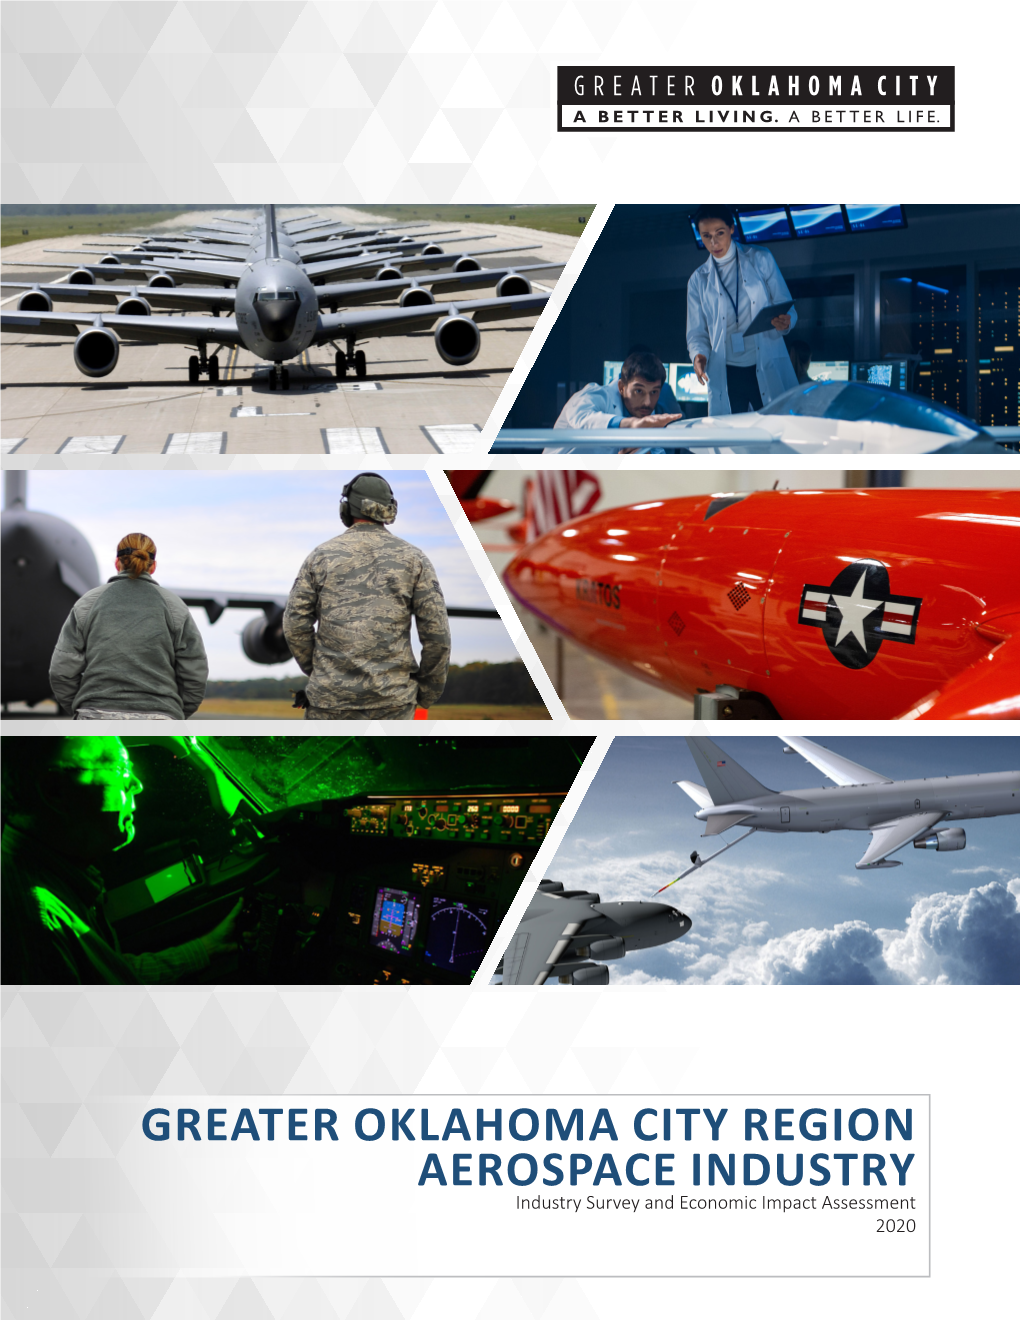 GREATER OKLAHOMA CITY REGION AEROSPACE INDUSTRY Industry Survey and Economic Impact Assessment 2020